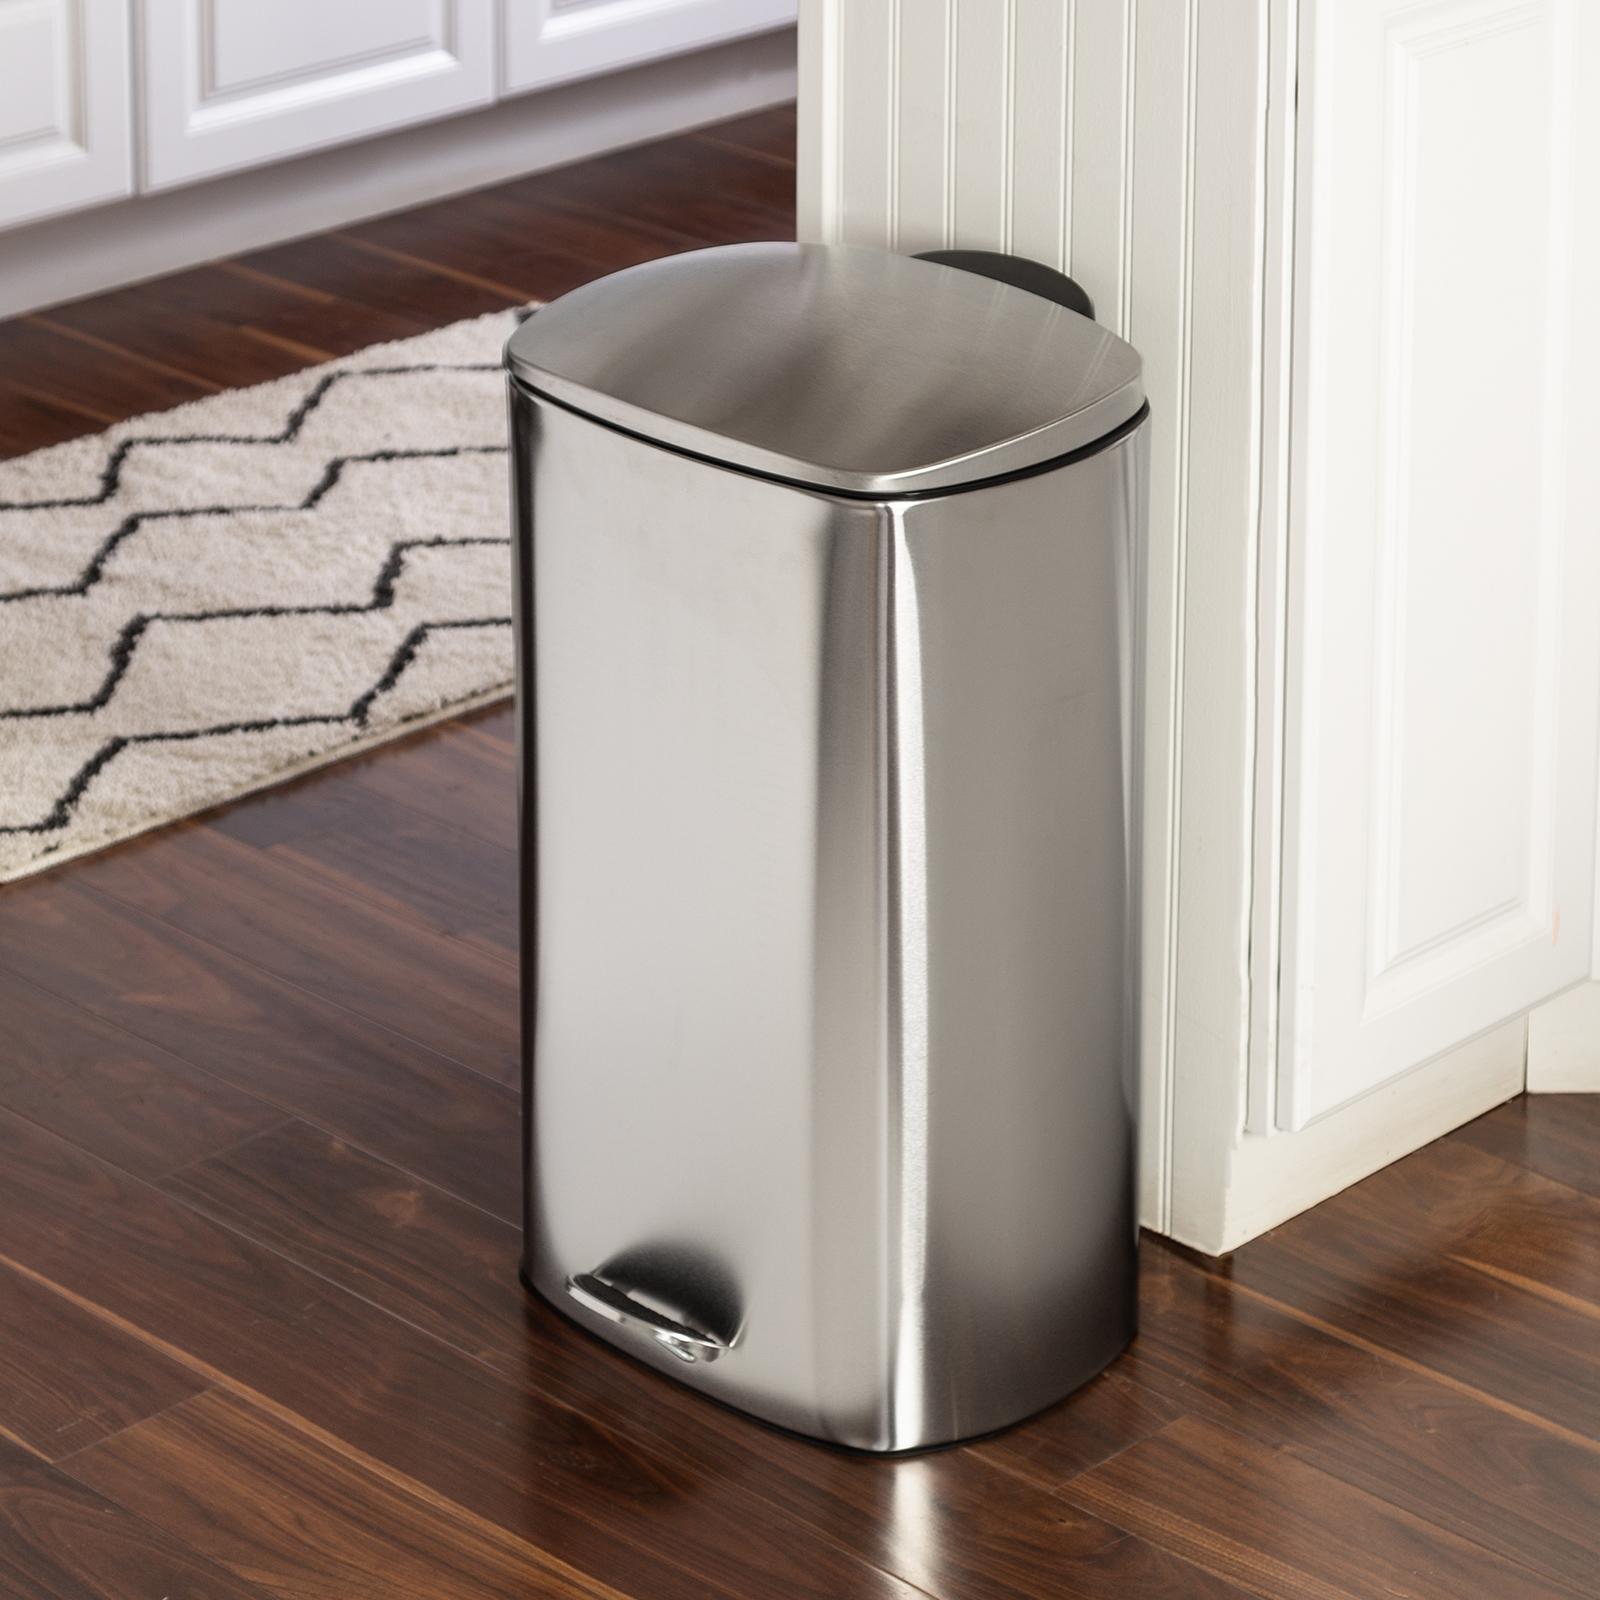 Honey-Can-Do Set of Stainless Steel Step Trash Cans with Lid